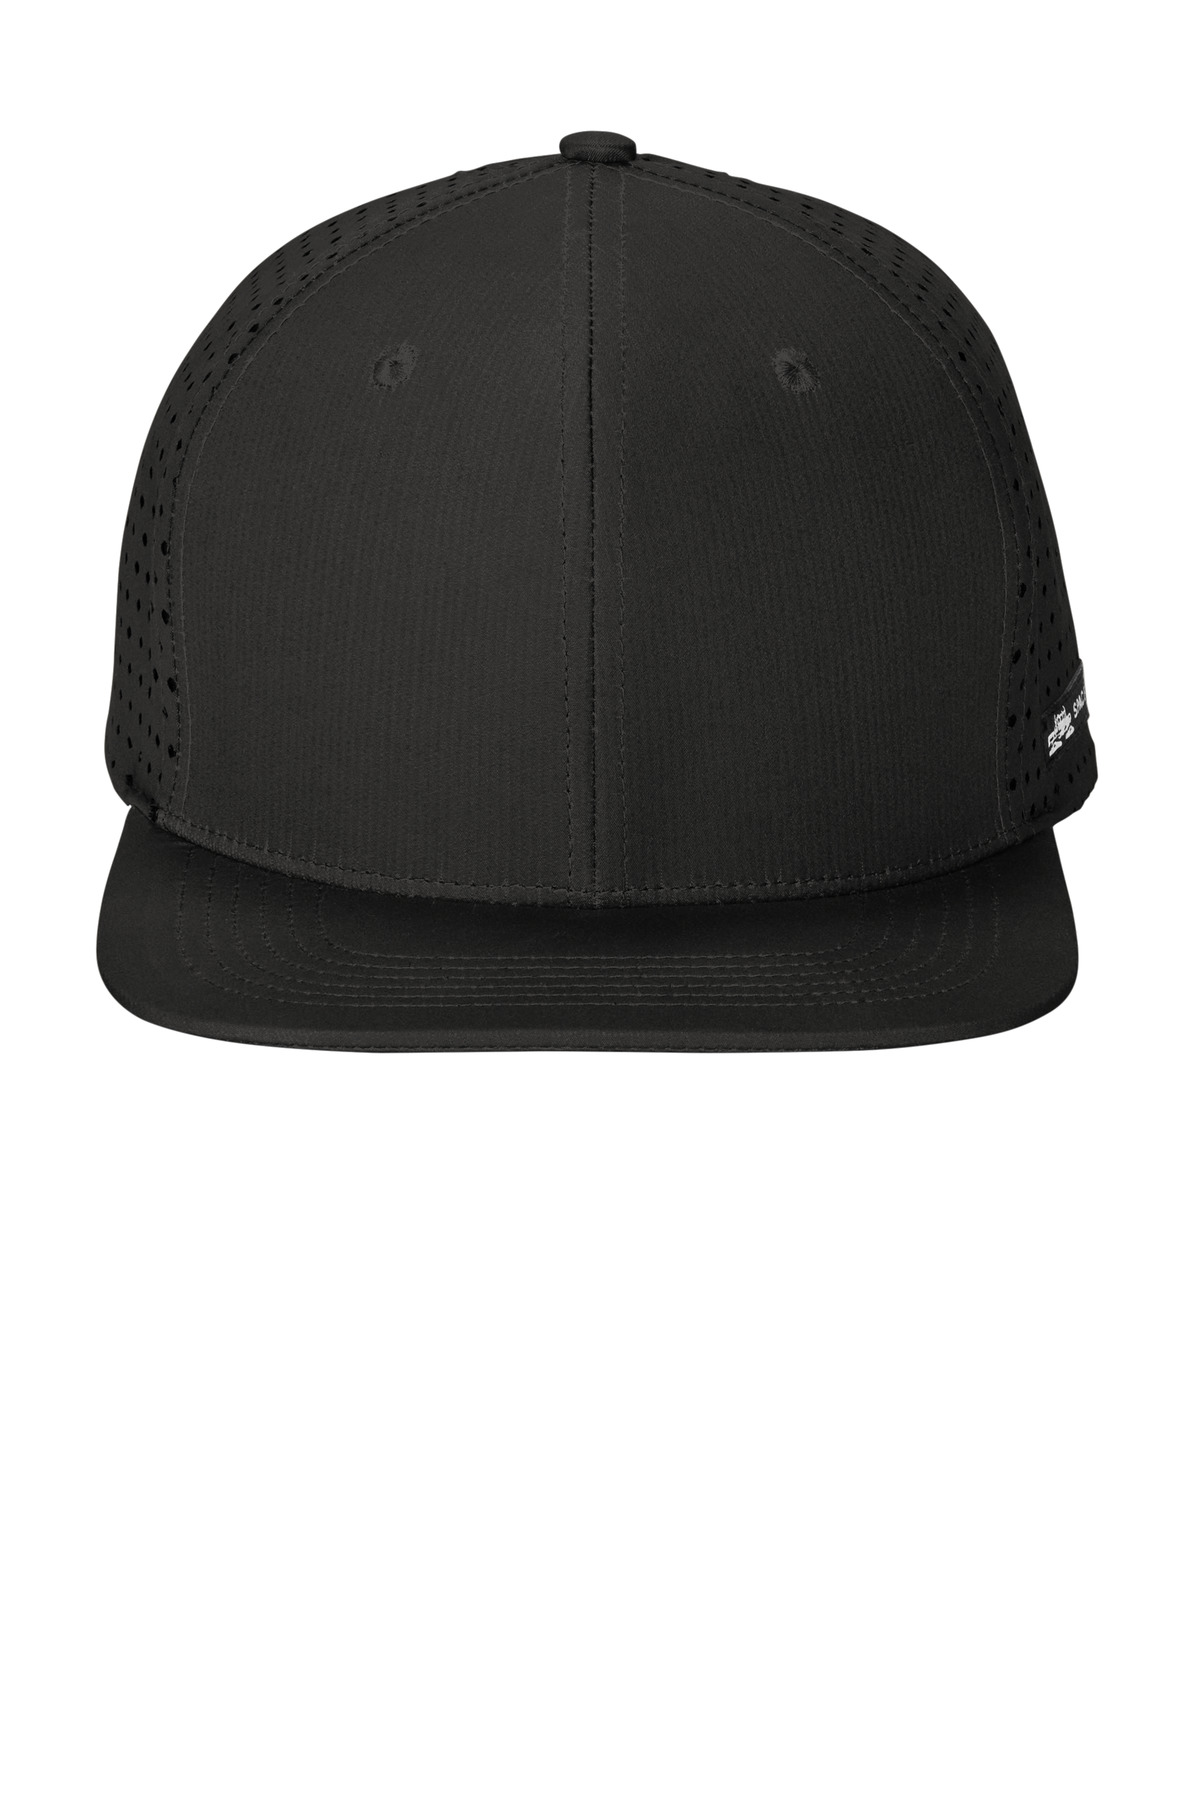 LIMITED EDITION Spacecraft Salish Perforated Cap-